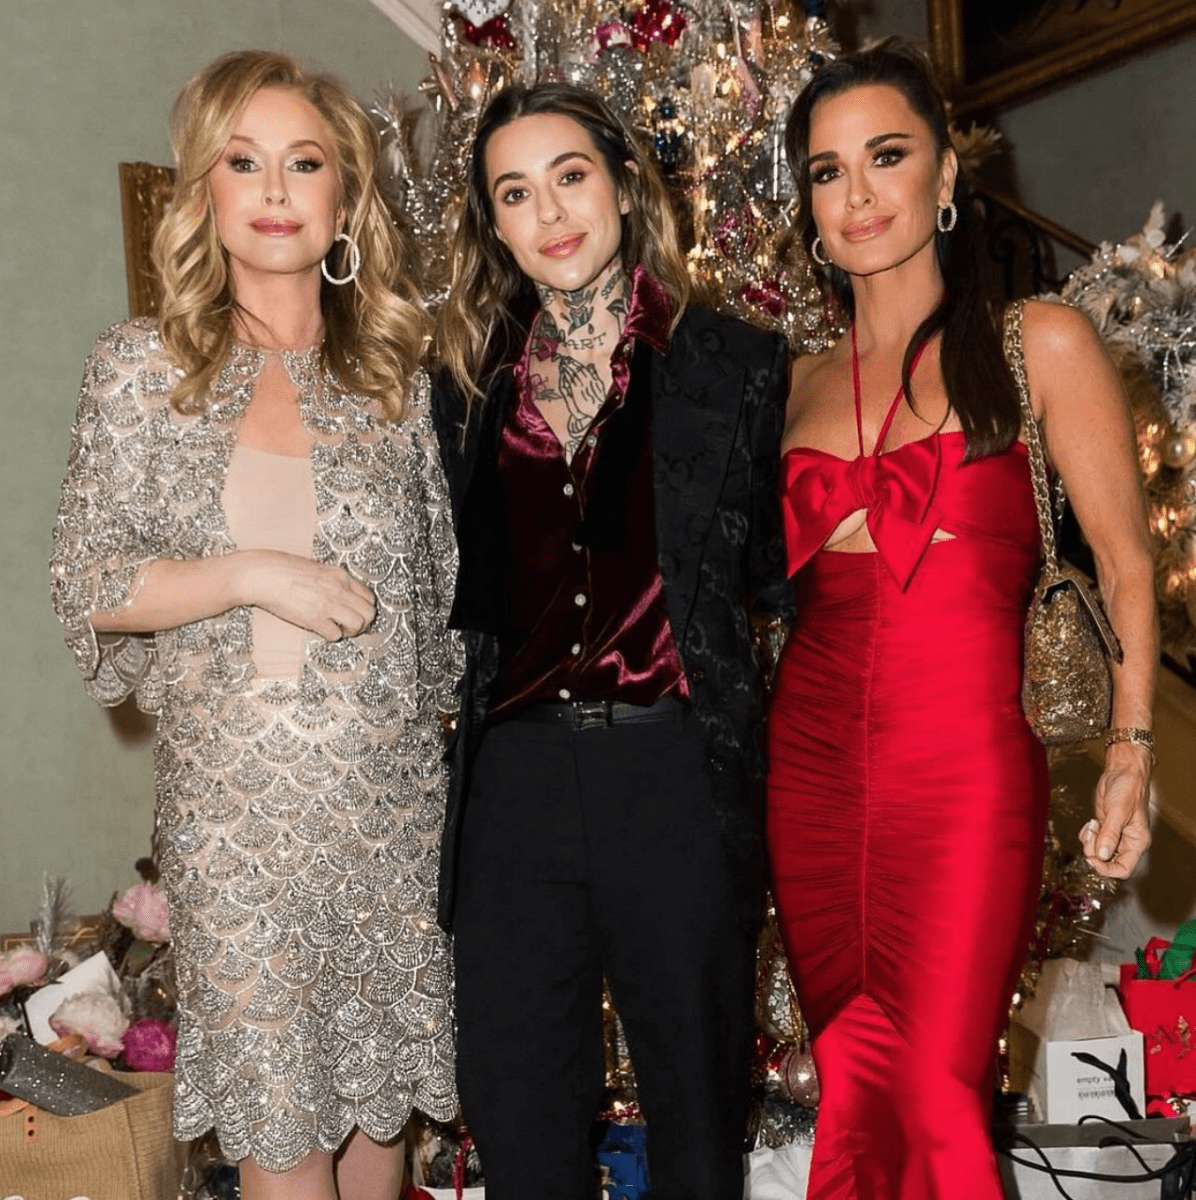 RHOBH OG Kyle Richards and friend Morgan Wade attend Kathy Hilton's Christmas party